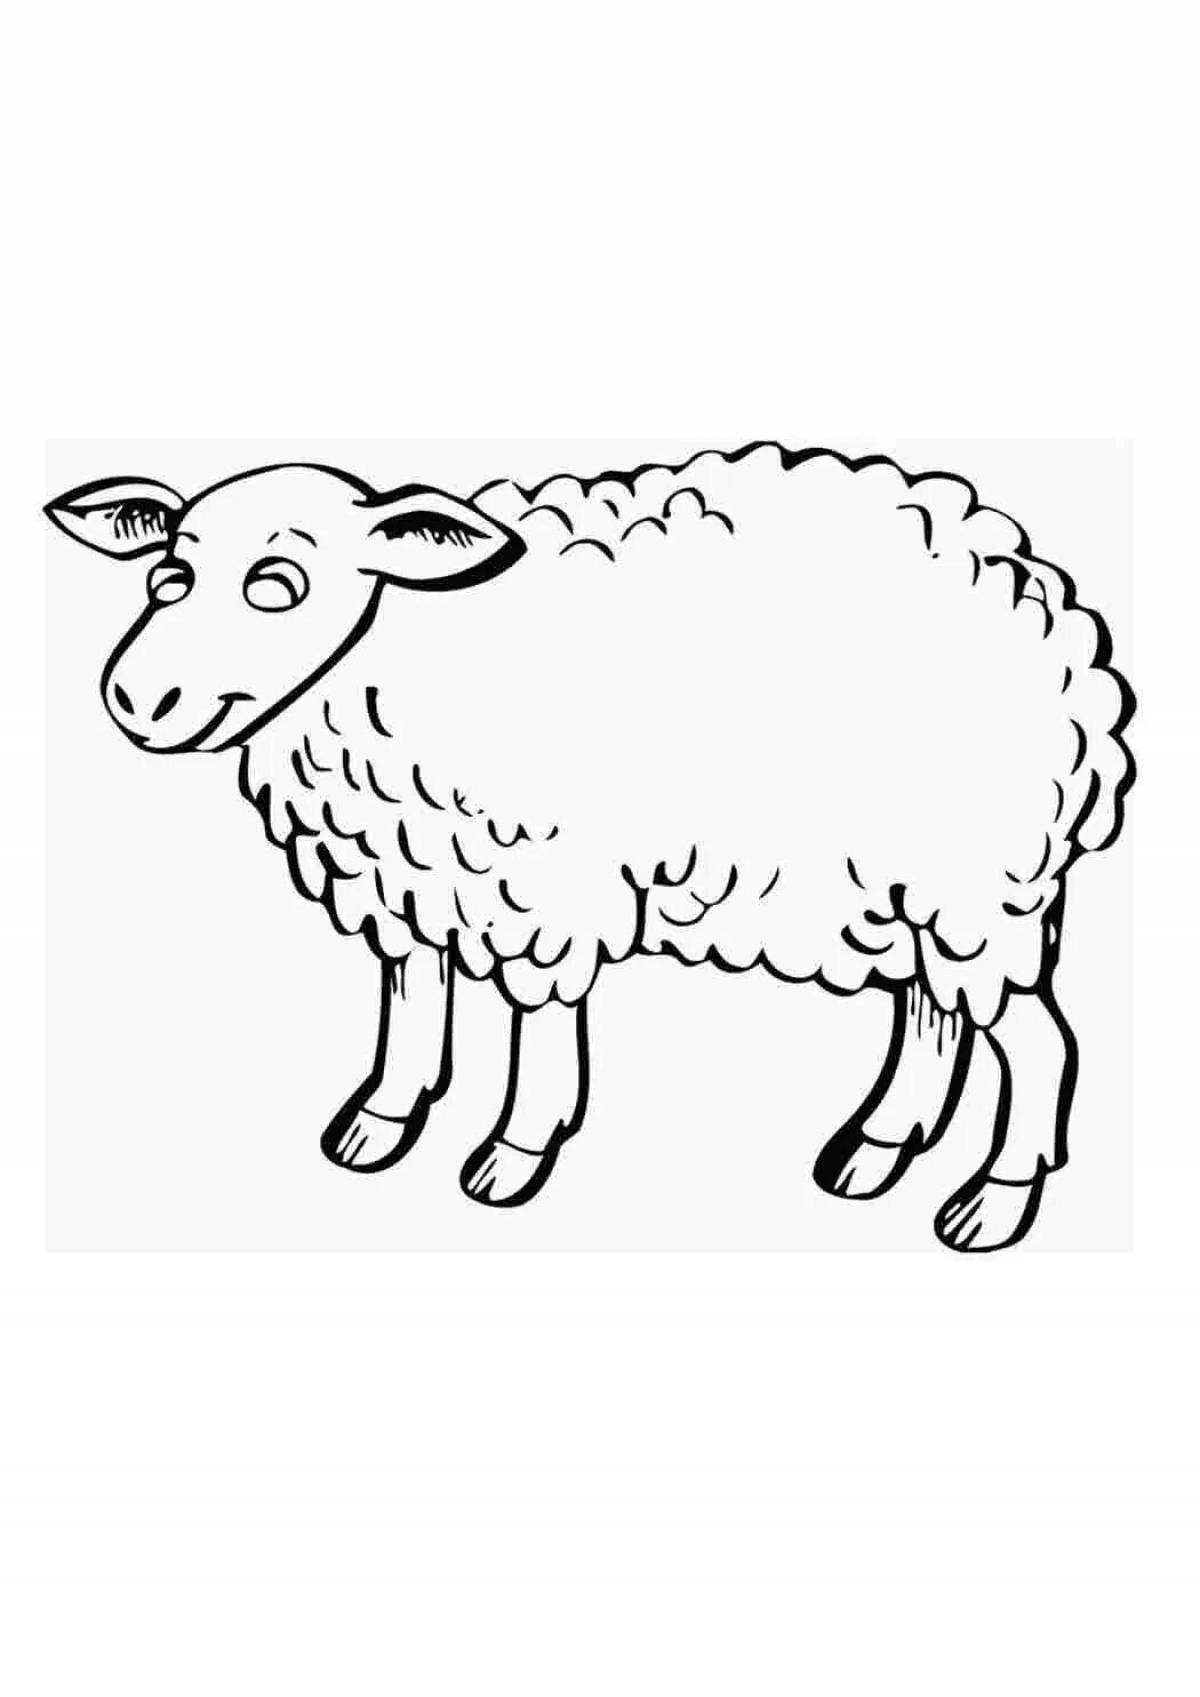 Joyful sheep coloring book for children 4-5 years old